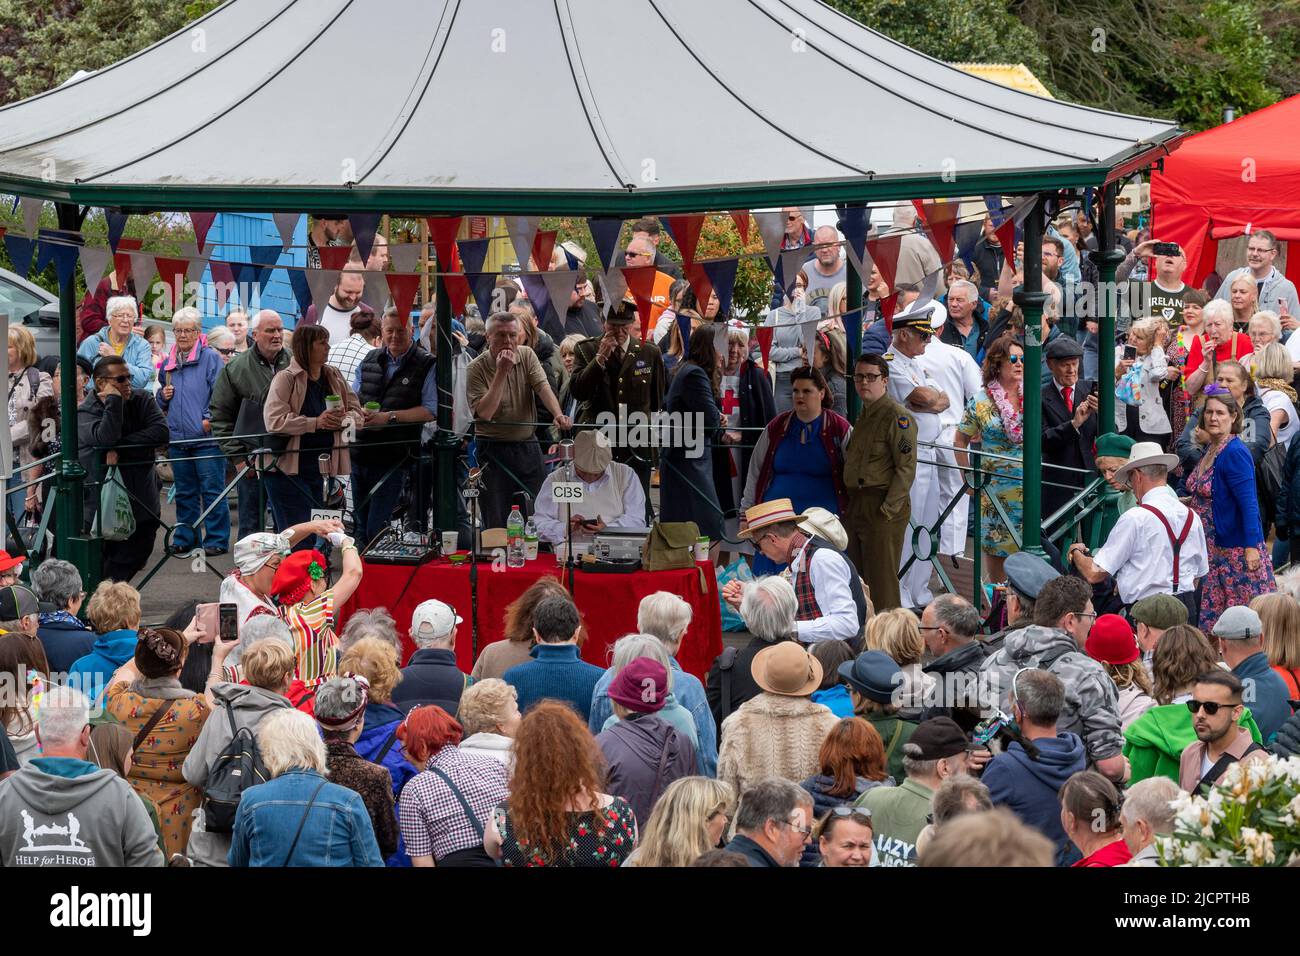 Haworth 1940 vintage retro event (busy crowded, audience watching re-enactors dancers performing live, entertaining show) - West Yorkshire England UK. Stock Photo